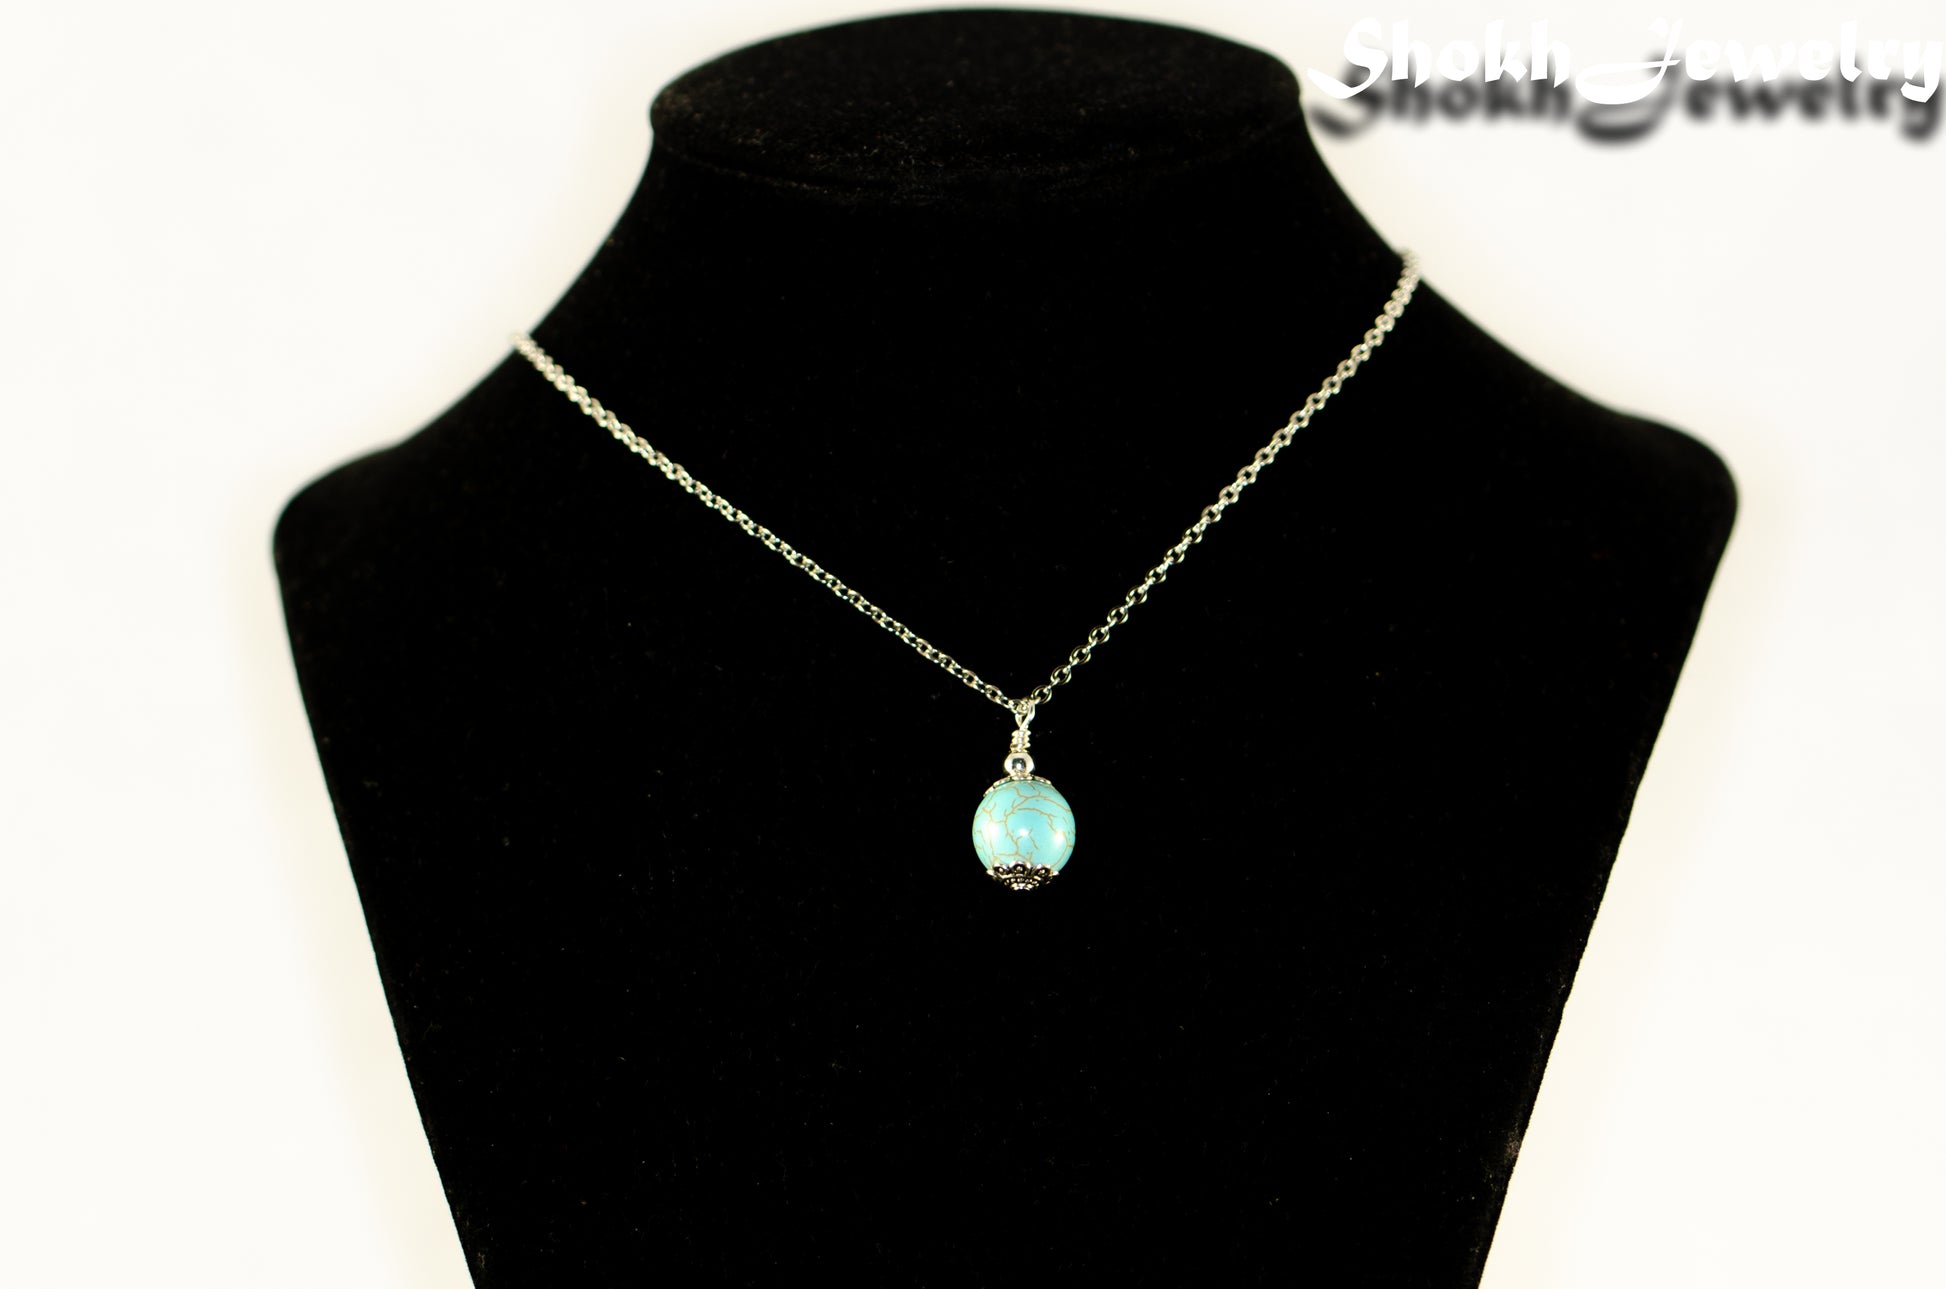 12mm Turquoise Howlite Pendant Necklace displayed on a bust.